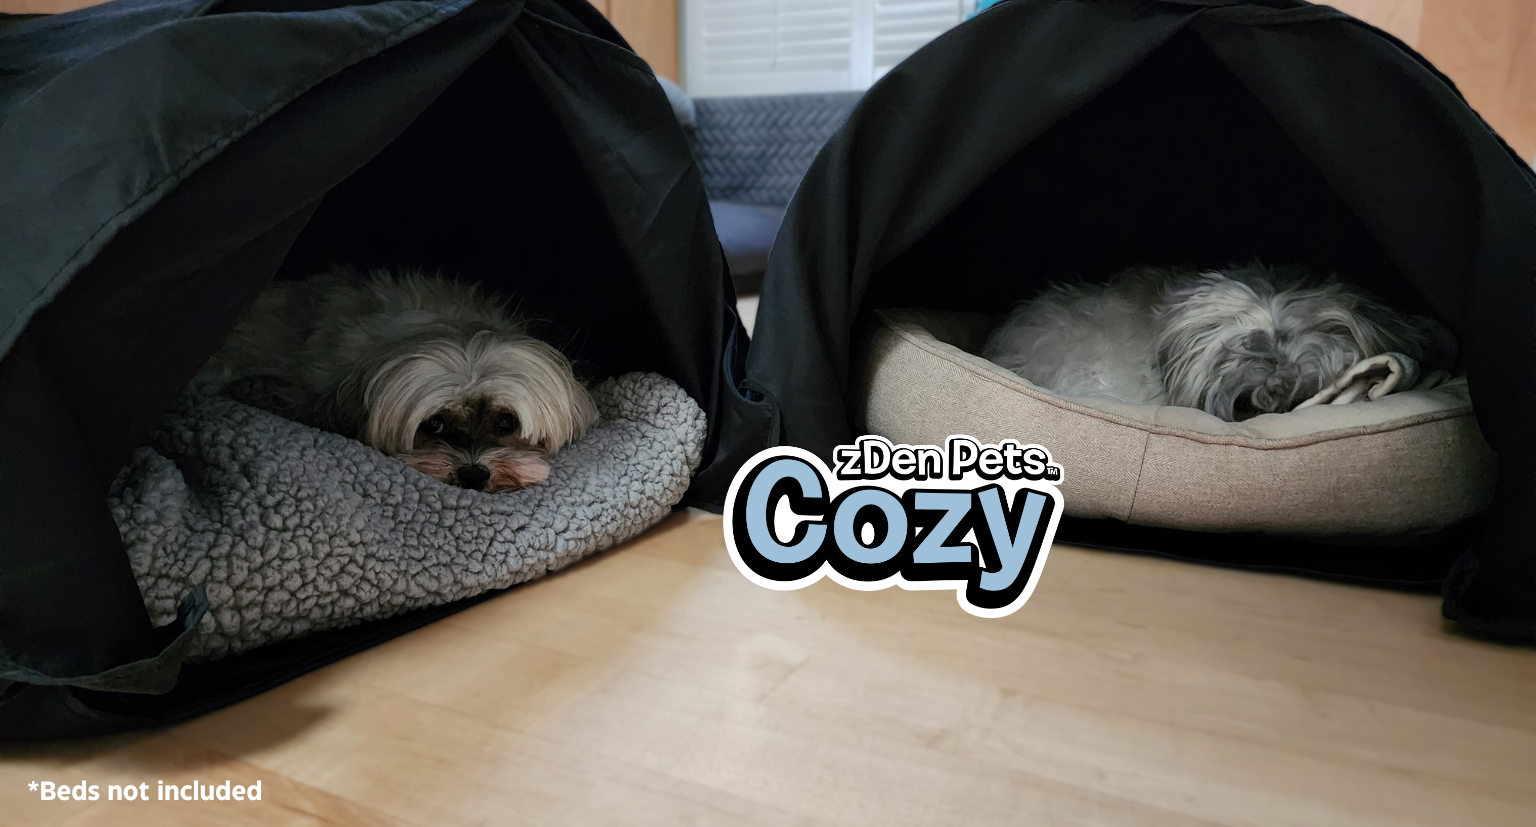 Load video: zDen Pets Cozy den for dogs and cats is a dark and comfy sleep space  that is great for pets who are anxious or need a calming place to rest